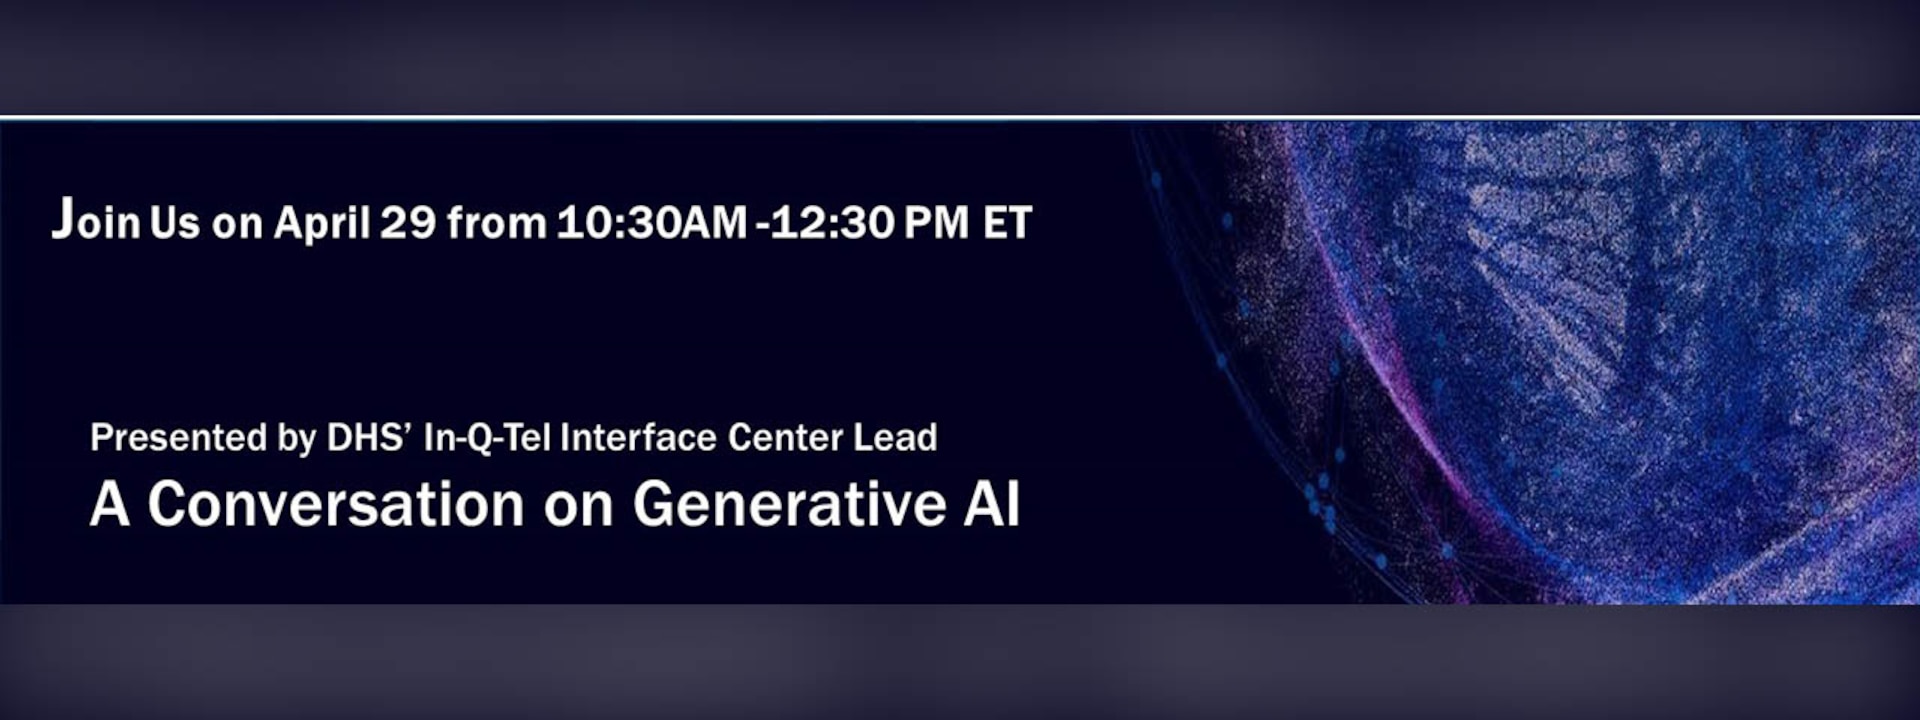 On April 29, from 10:30 a.m. - 12:30 p.m. ET, you're invited to join the discussion about generative AI. 